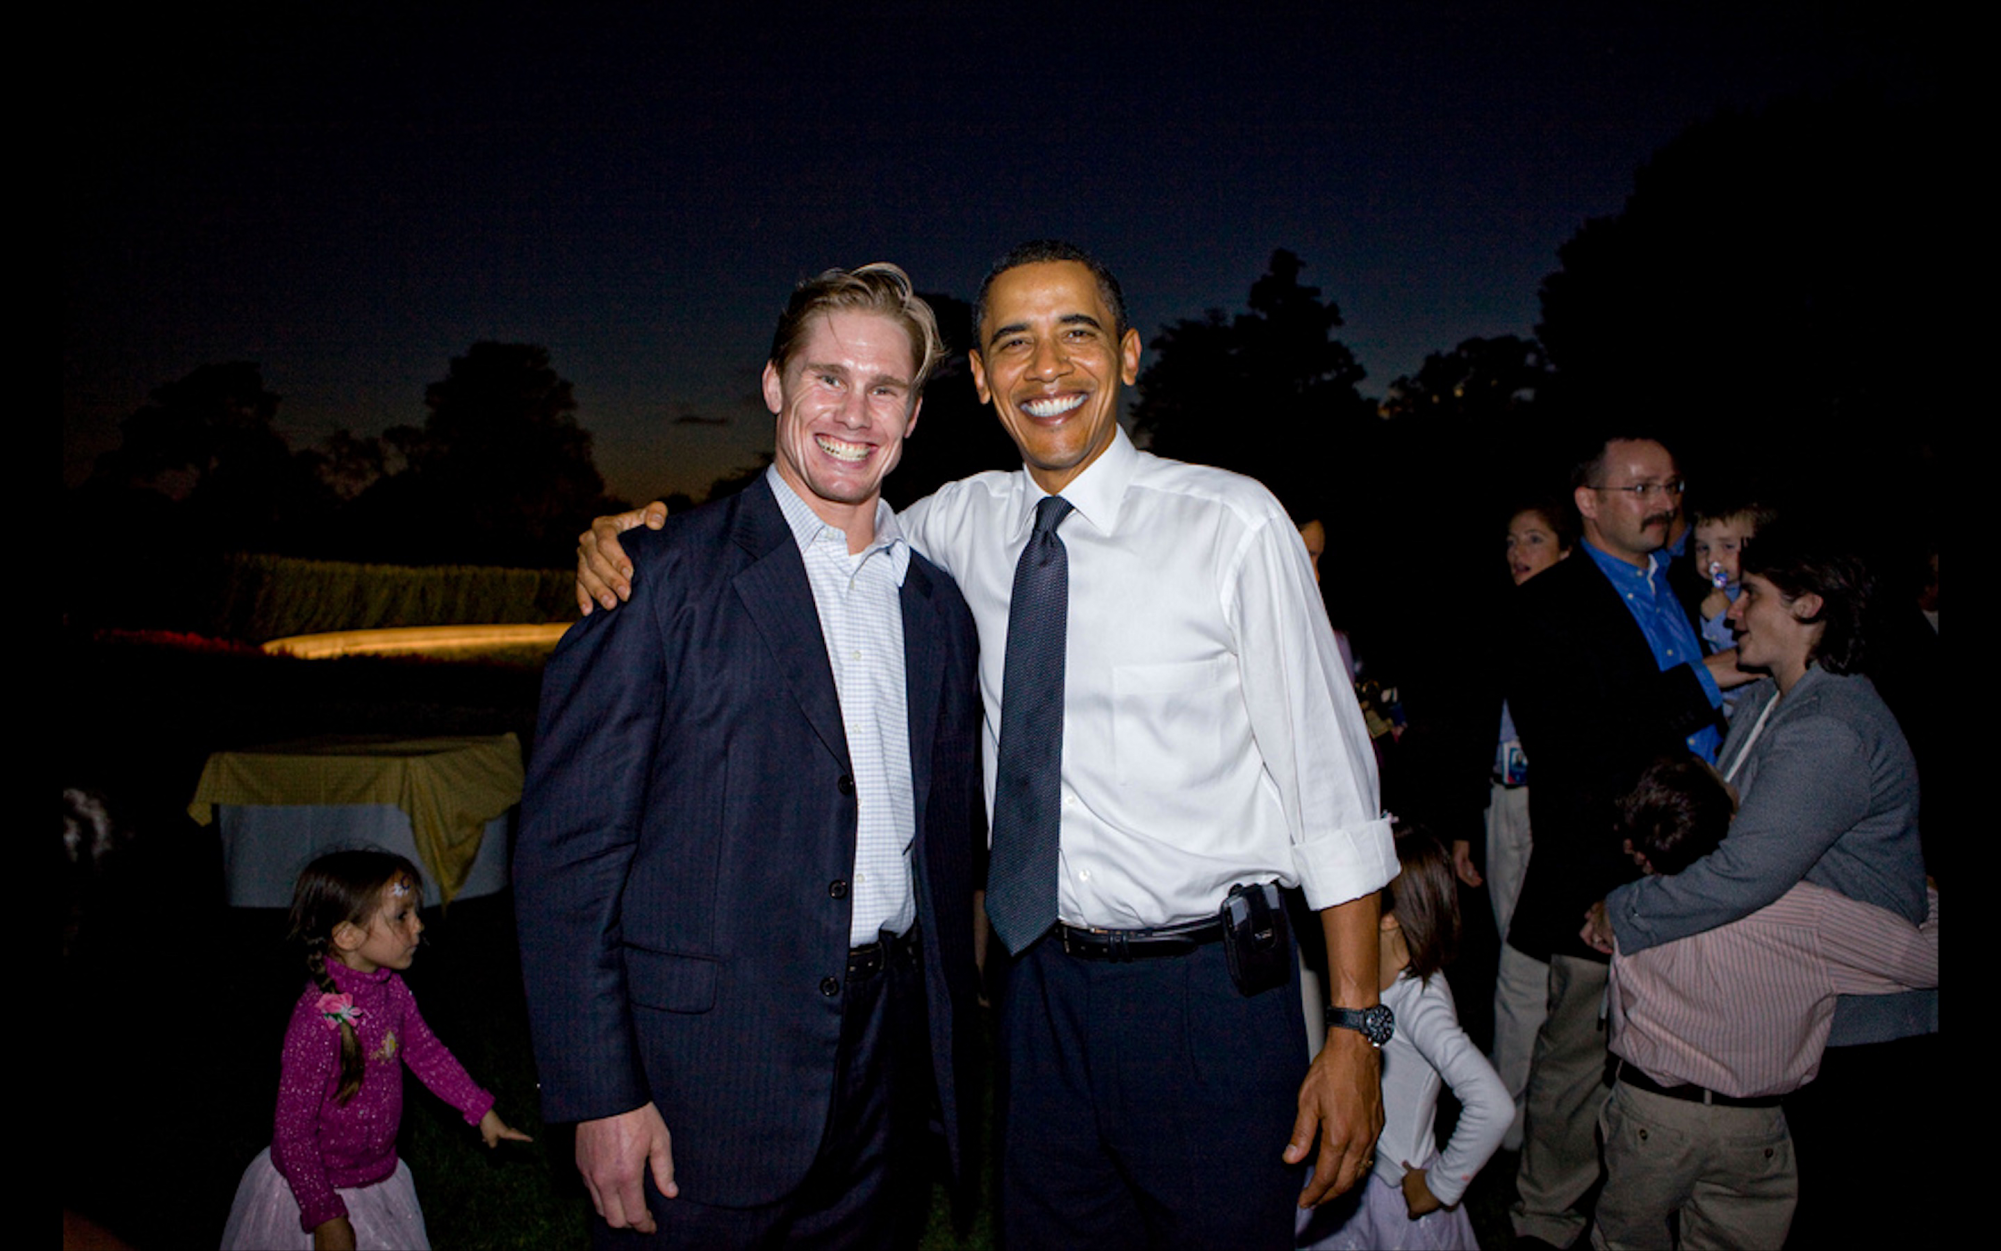 Safety and security coordinator Tim Reboulet stands with former President Barack Obama. Reboulet was a special agent for 22 years and took his position at Ladue May 2023. “My mentality is educating students and faculty on what the threats are and [how] to make a decision,” Reboulet said. “The Four Es is a great example of that, giving people options [but] not hindering them.”
